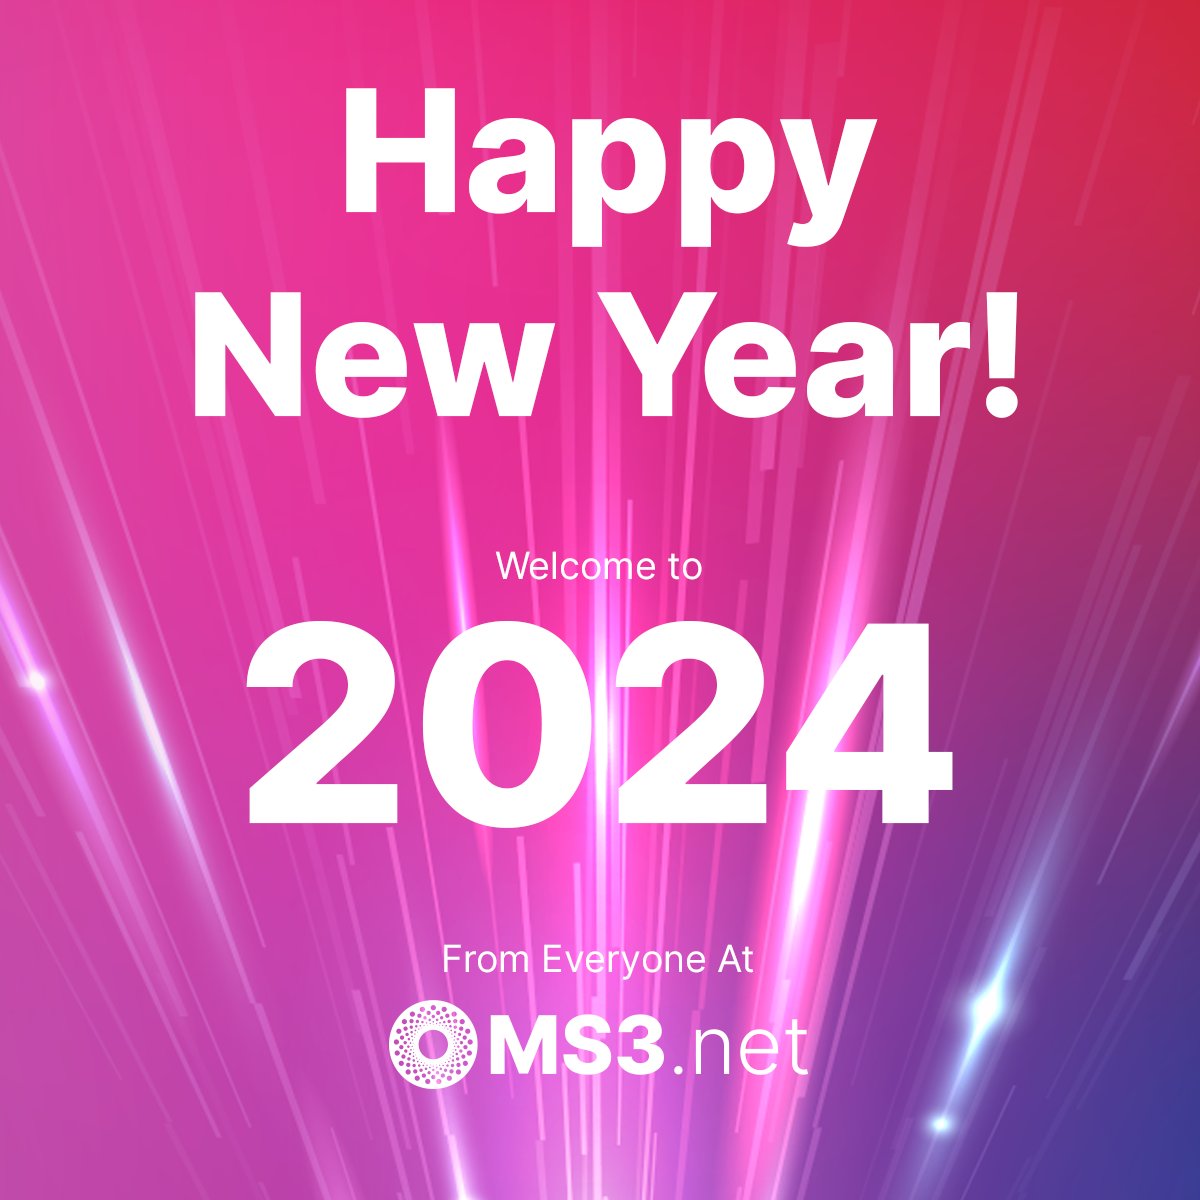 Happy New Year! Team MS3 would like to thank everyone for such an amazing 2023 and wish everyone a very 2024! #Ultrafast #Broadband #NewYear #HappyNewYear #2024